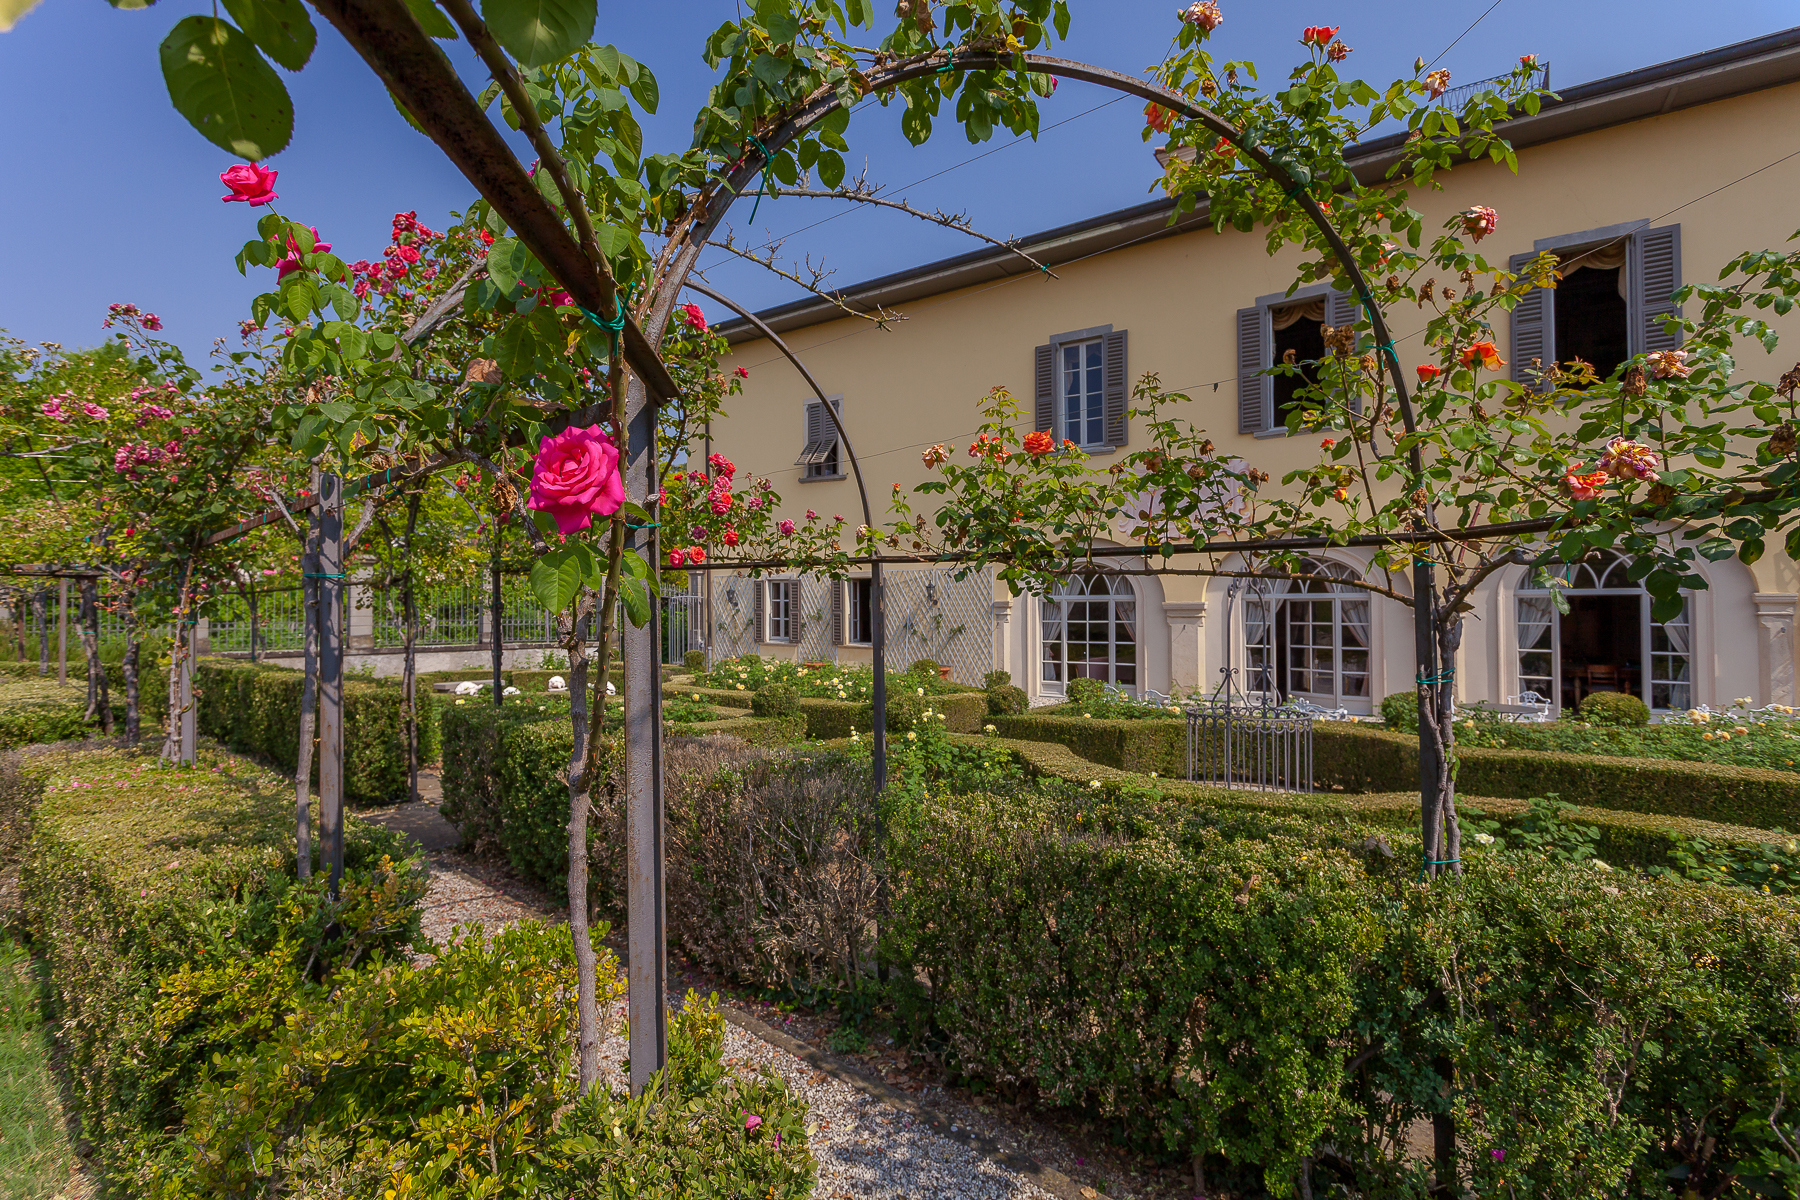 Charming villa with Italian-style garden and park